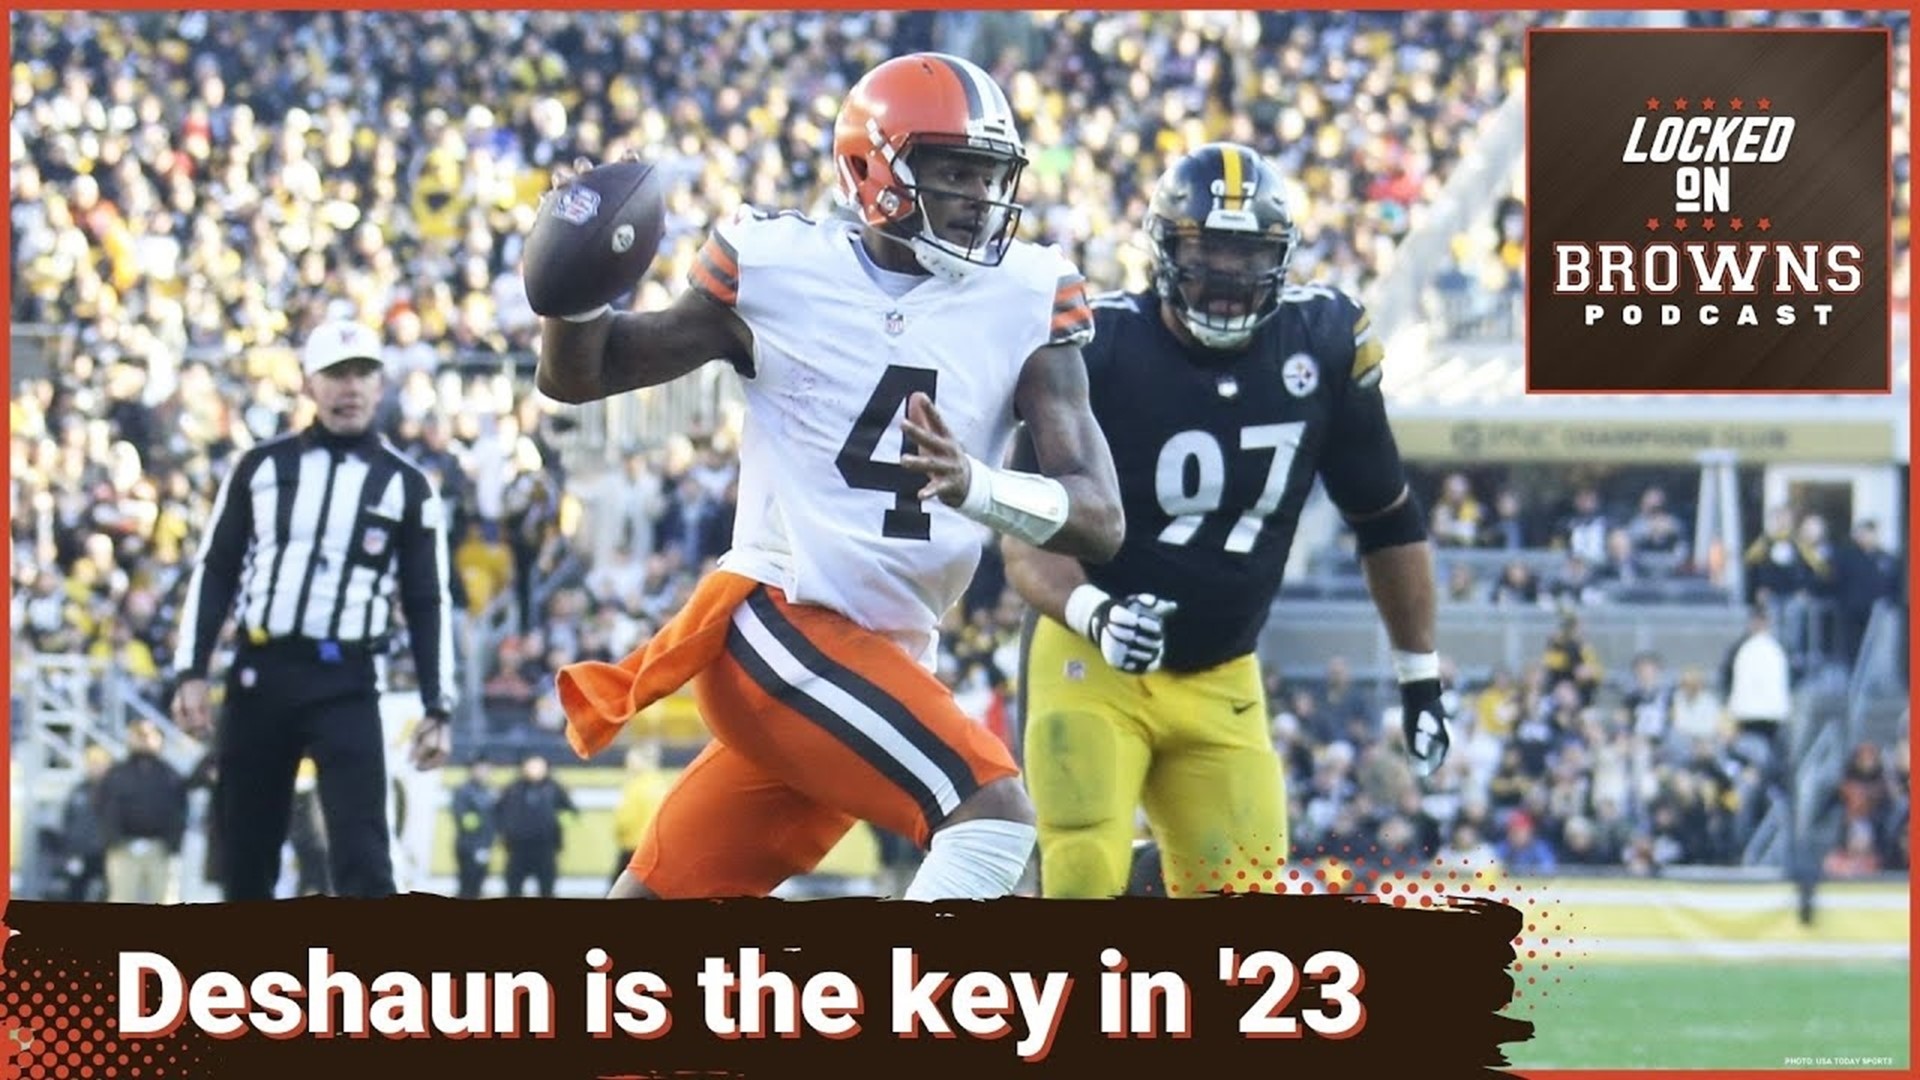 The Cleveland Browns have a deep roster but 2023 comes does to Deshaun Watson and his ability to return to his 2020 form.